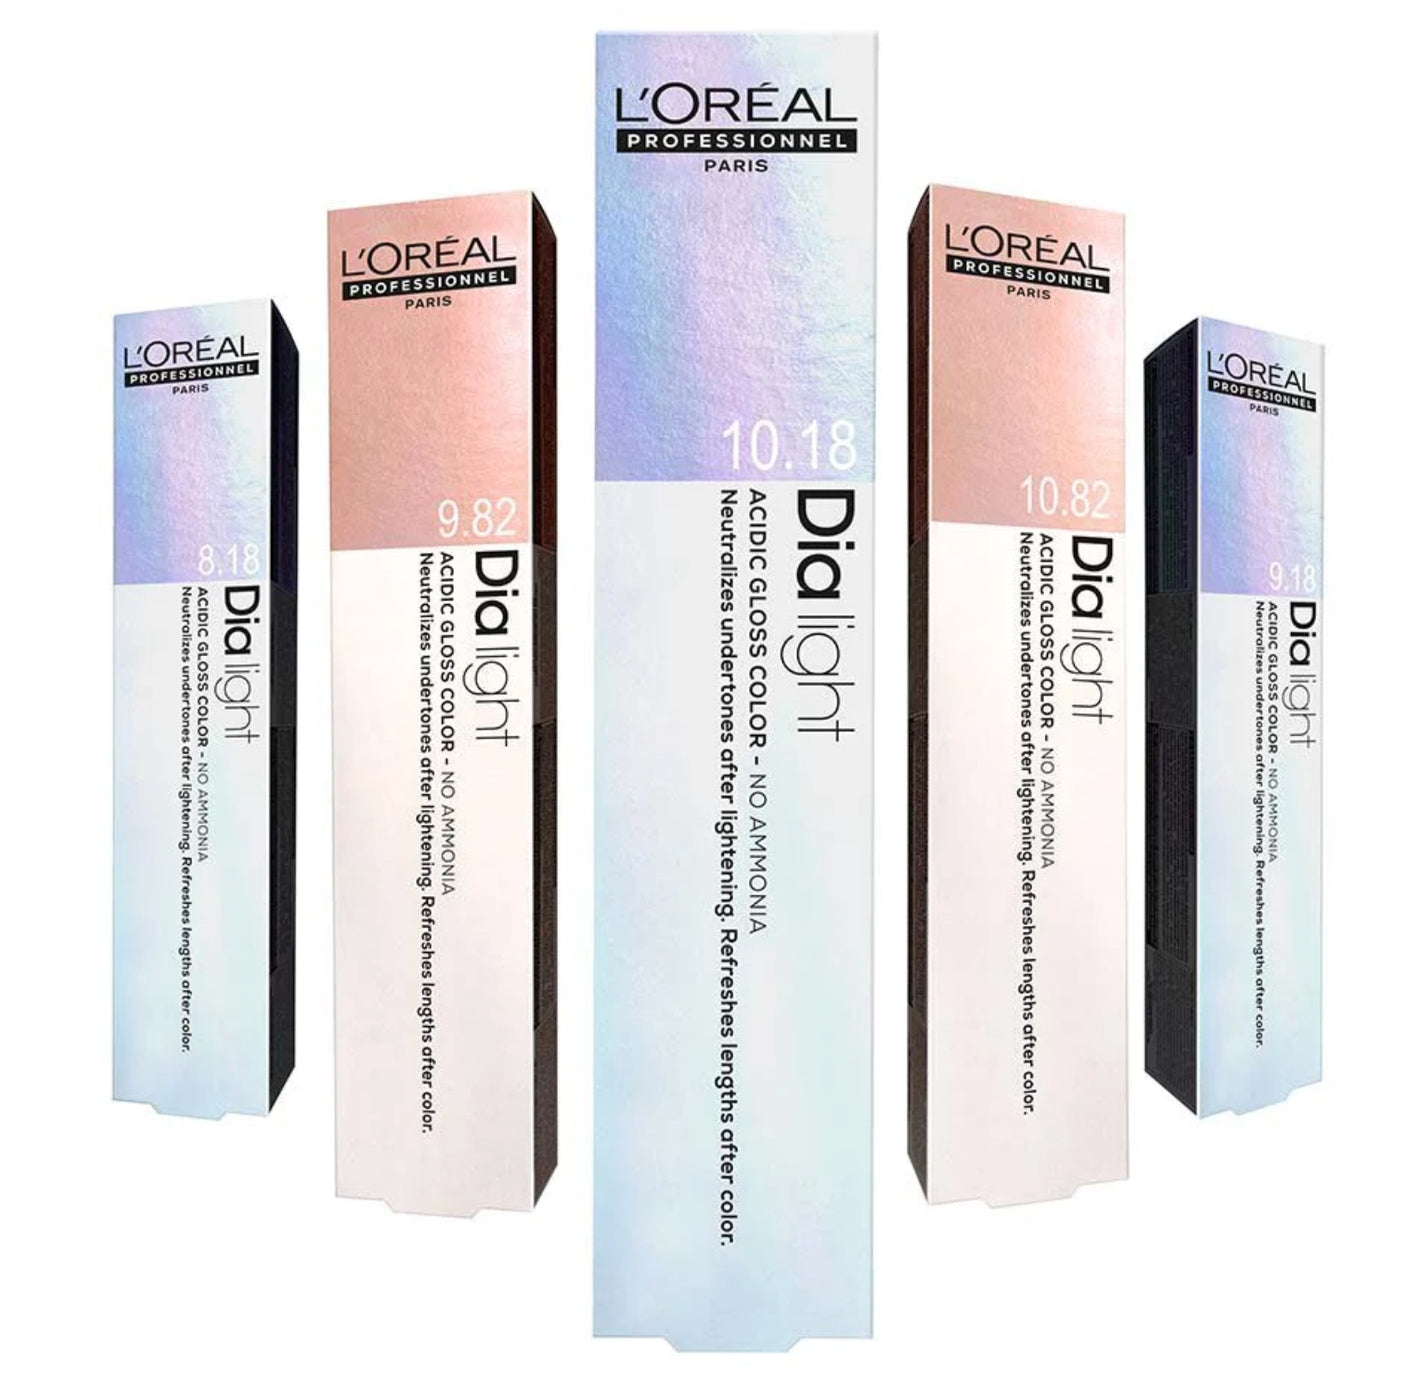 Loreal Dia Light a group of three boxes of different types of lipstick